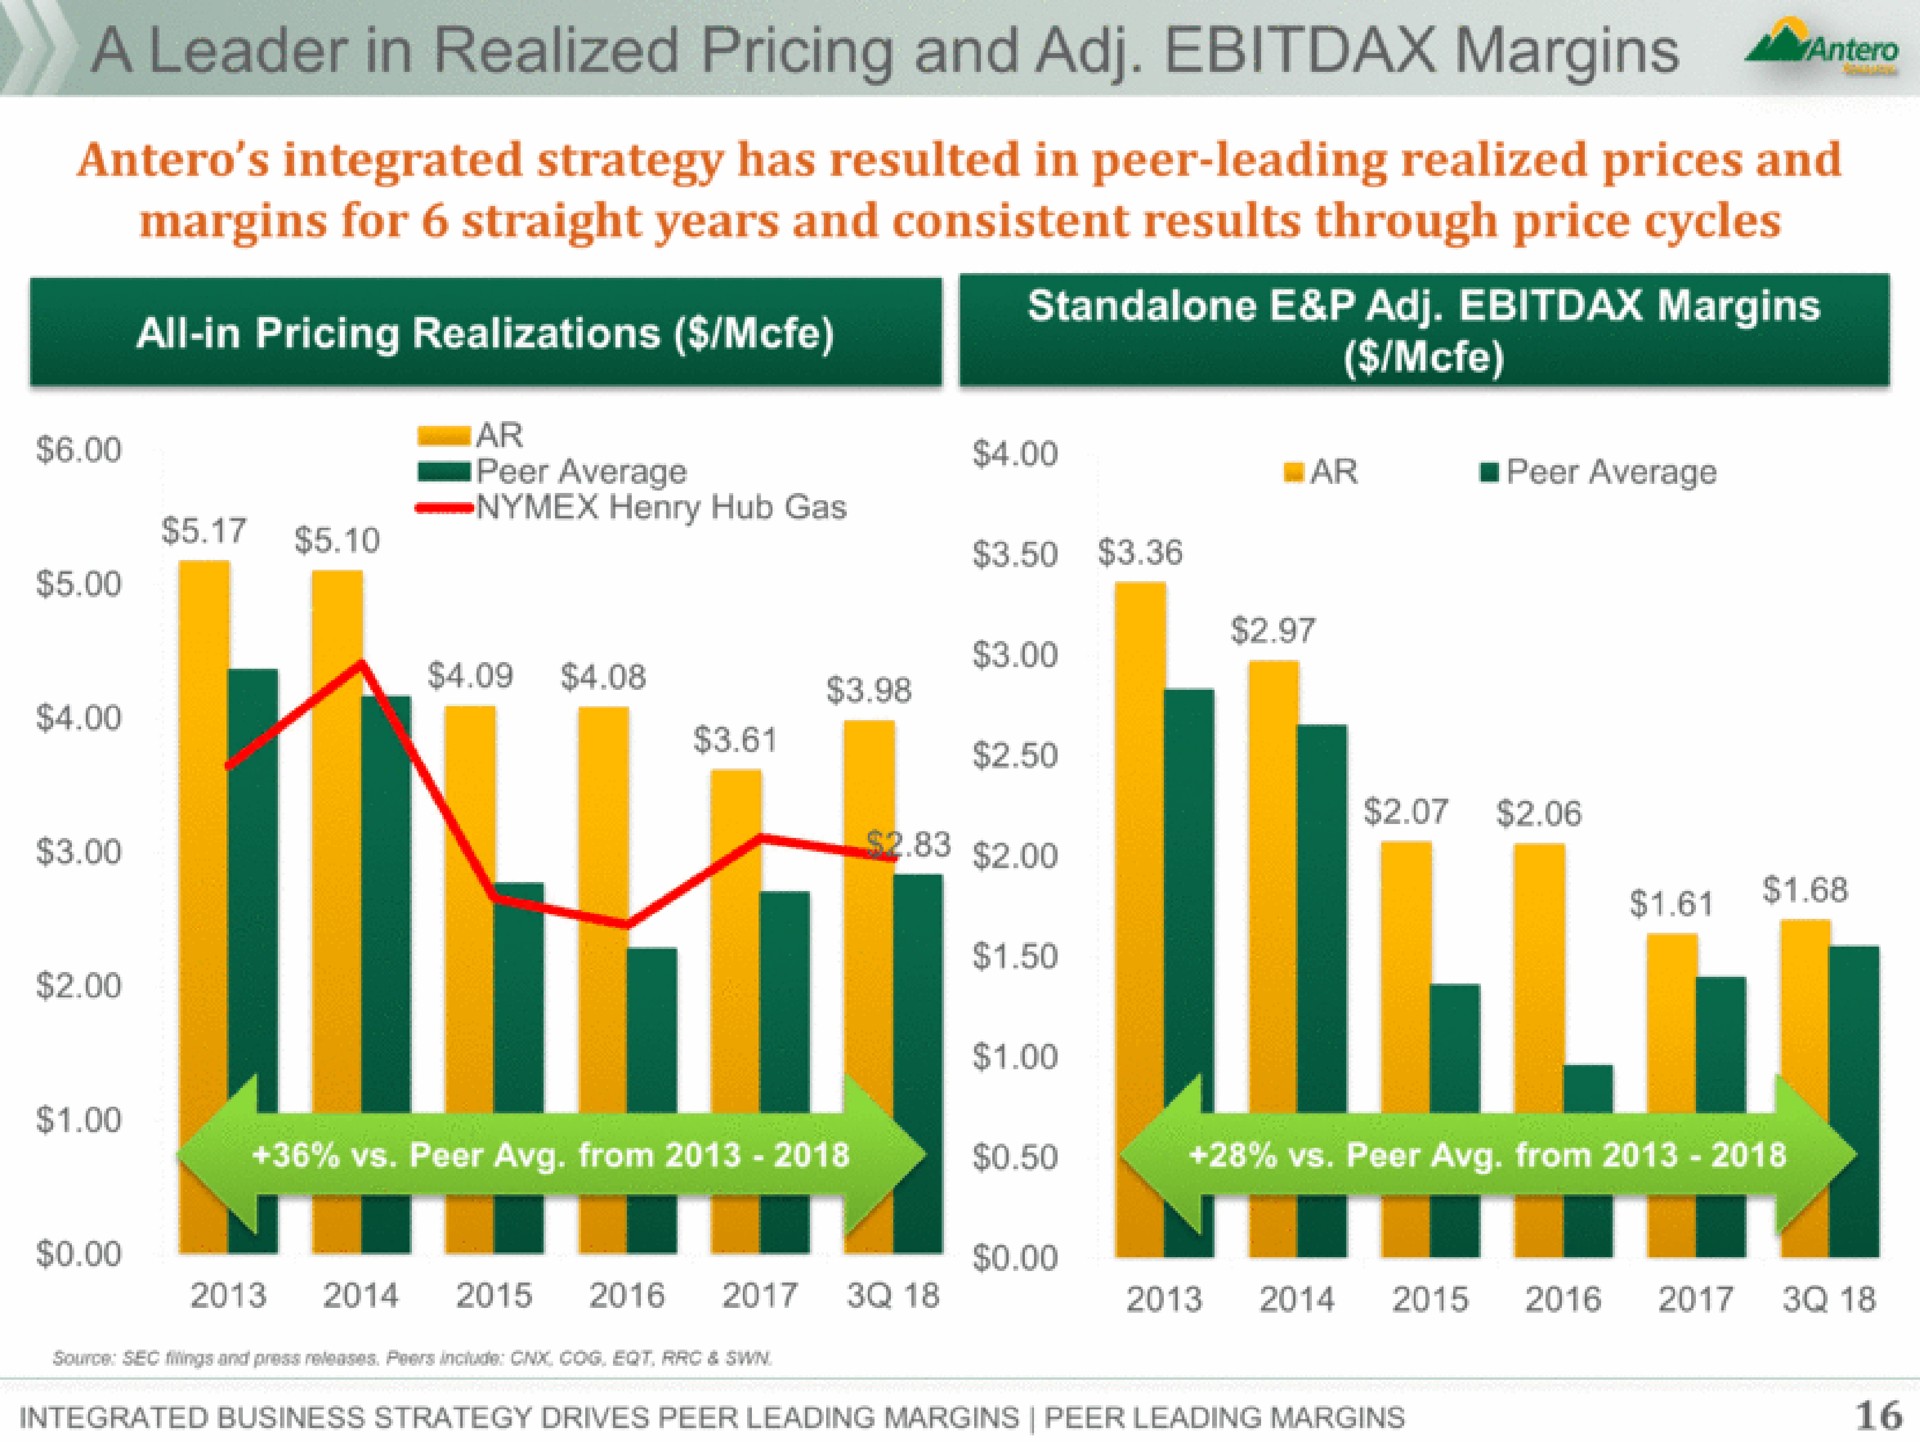 realized pricing and margins ante integrated strategy has resulted in peer leading realized prices and margins for straight years and consistent results through price cycles be | Antero Midstream Partners